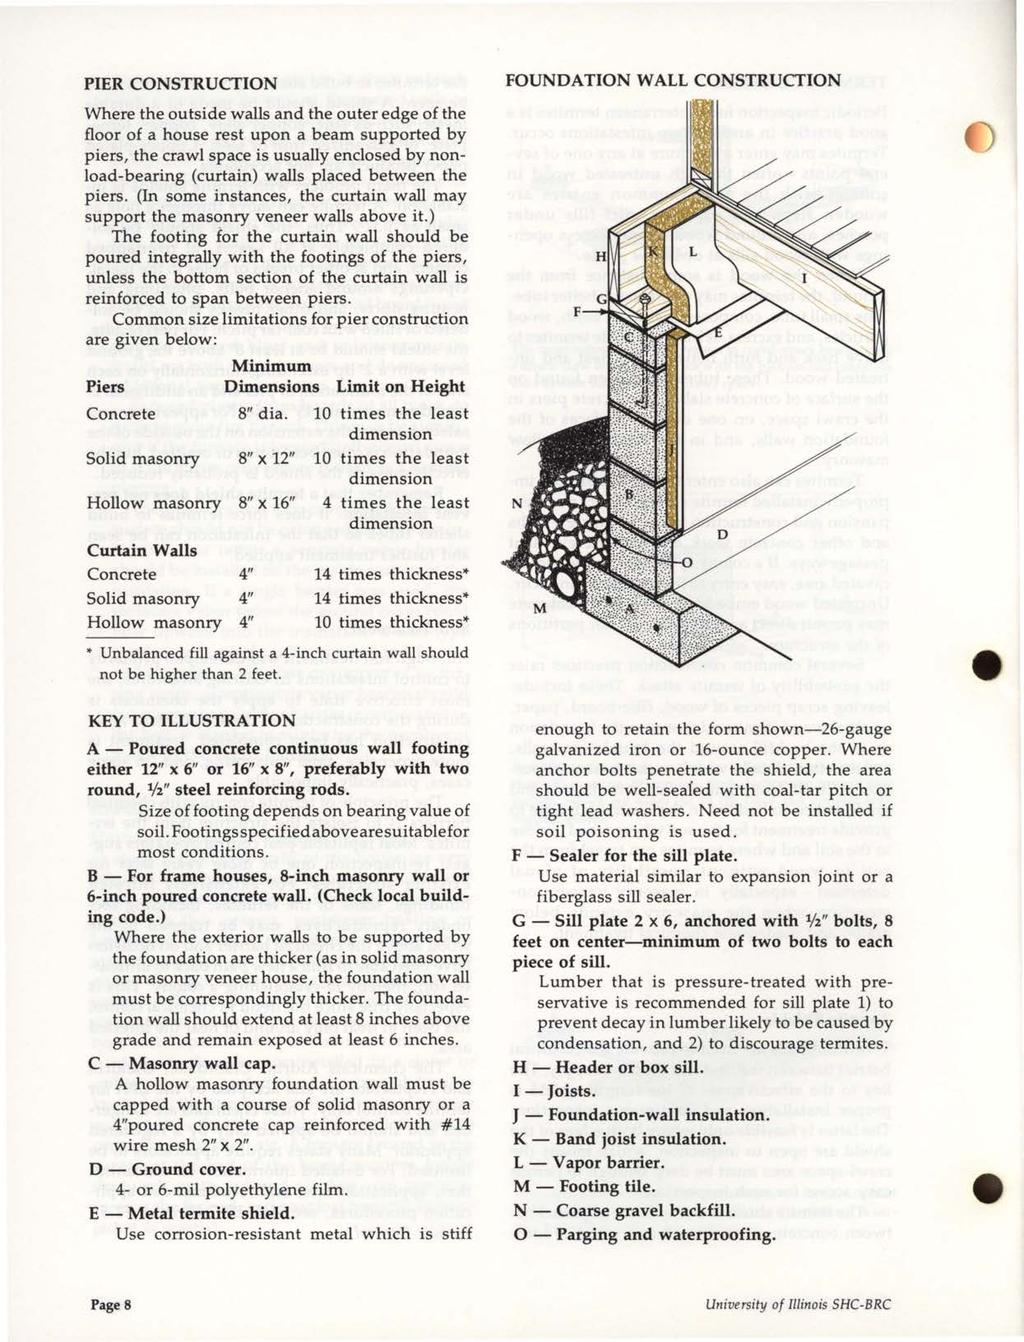 PIER CONSTRUCTION Where the outside walls and the outer edge of the floor of a house rest upon a beam supported by piers, the crawl space is usually enclosed by nonload-bearing (curtain) walls placed